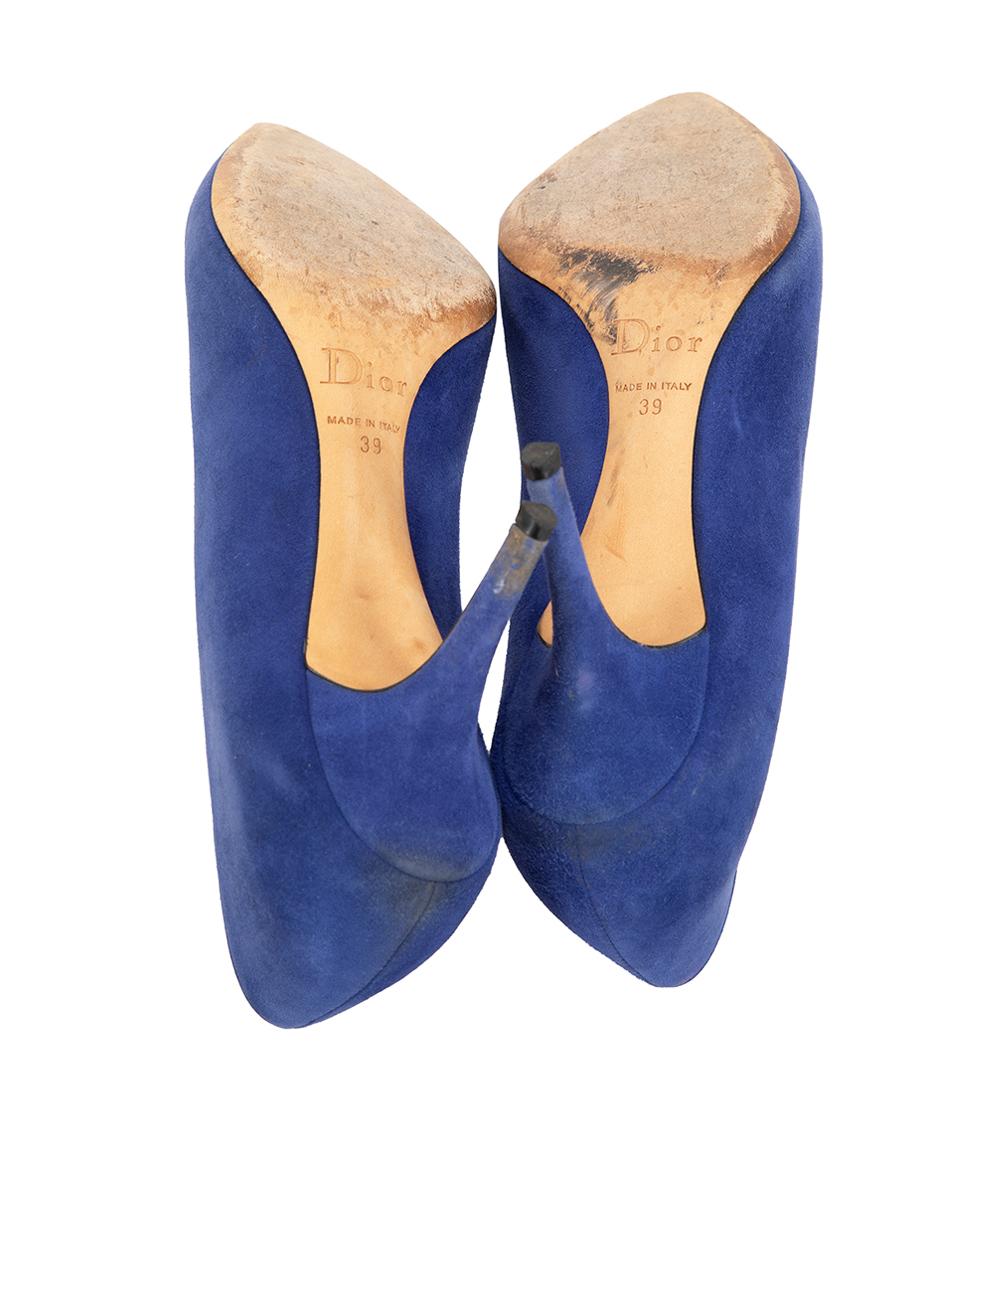 Dior Women's Blue Suede Pointed Toe Slip On Pumps For Sale 2